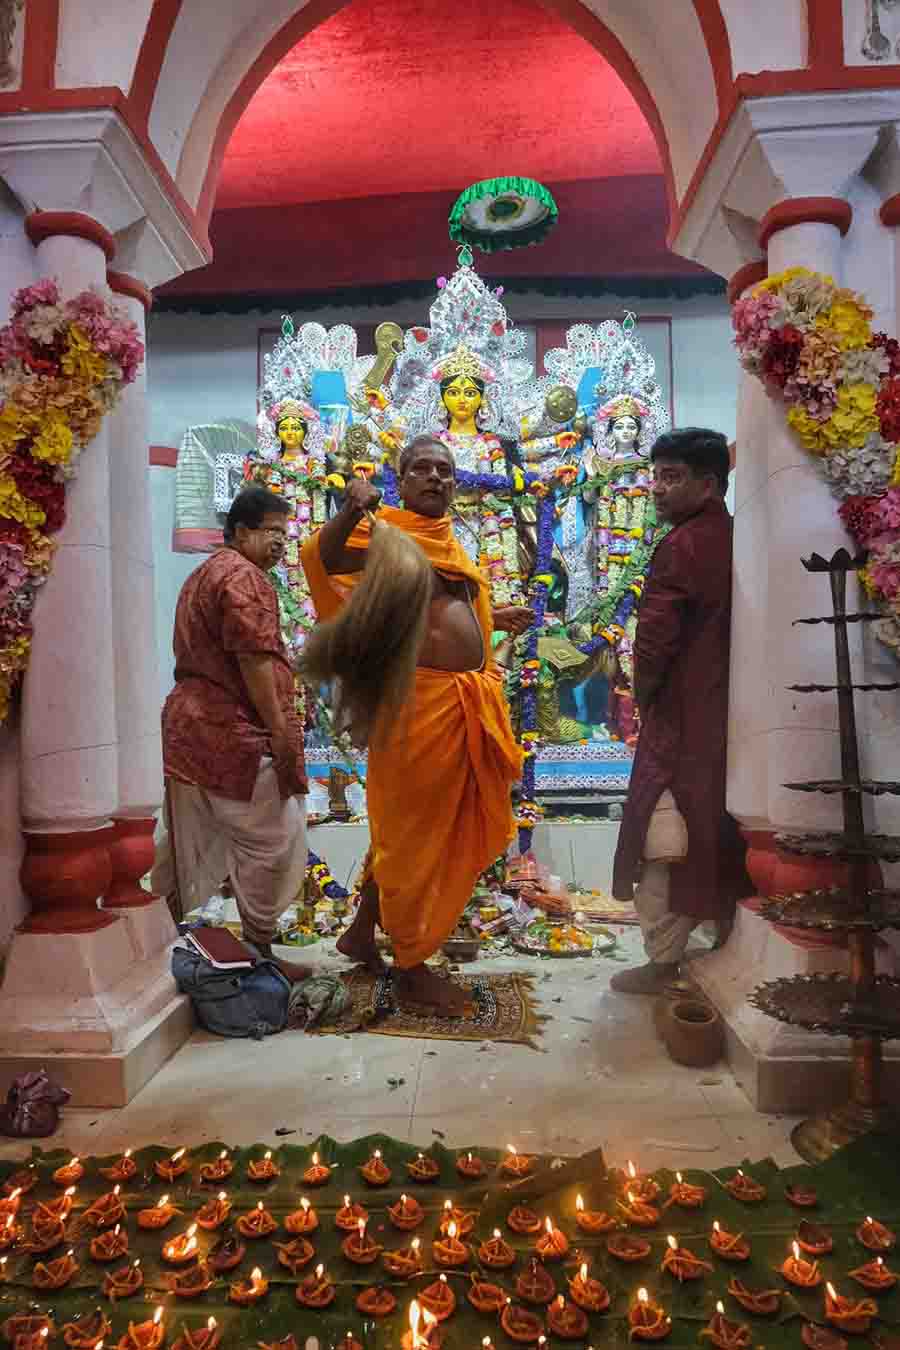 Sandhi Pujo and Aarti at Sabarna Roychowdhury Mejobari on Ashtami. The ancestral home was decorated with diyas, casting a warm glow, as countless devotees throng to offer their anjali to the goddess  